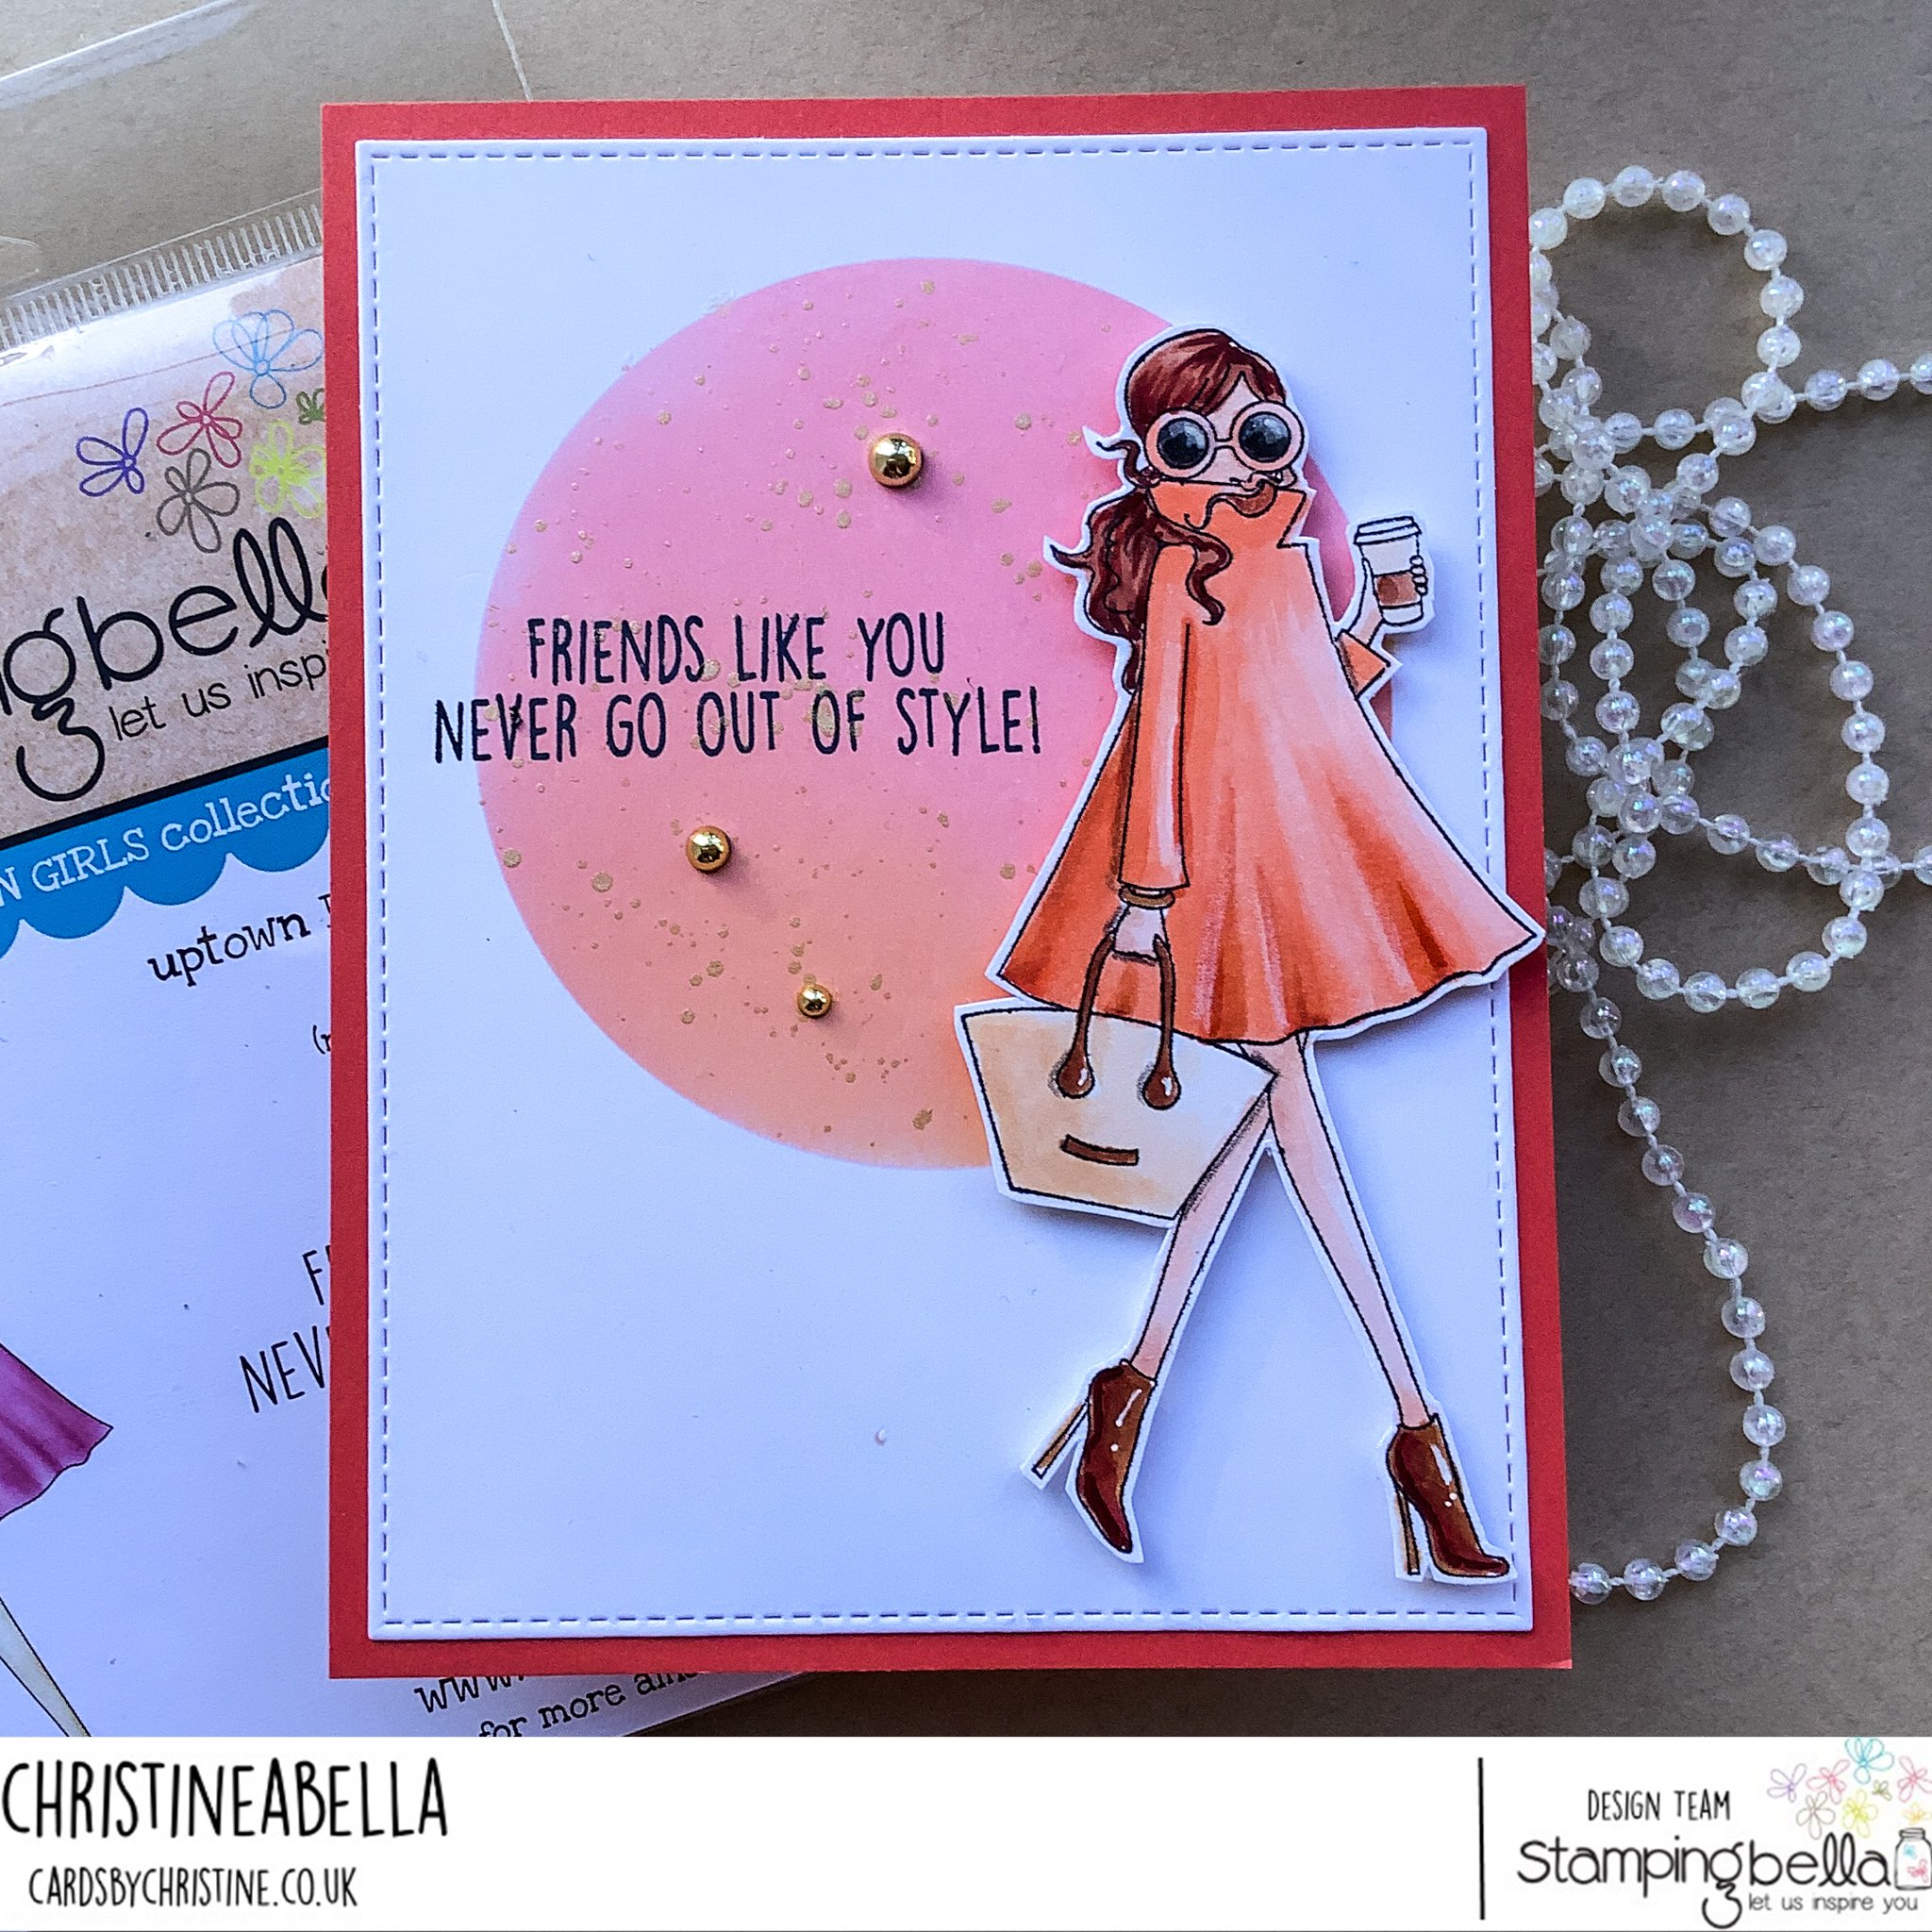 www.stampingbella.com: Rubber stamp used: Uptown girl FASHIONISTA, SKETCHY BACKDROP card by Christine Levison